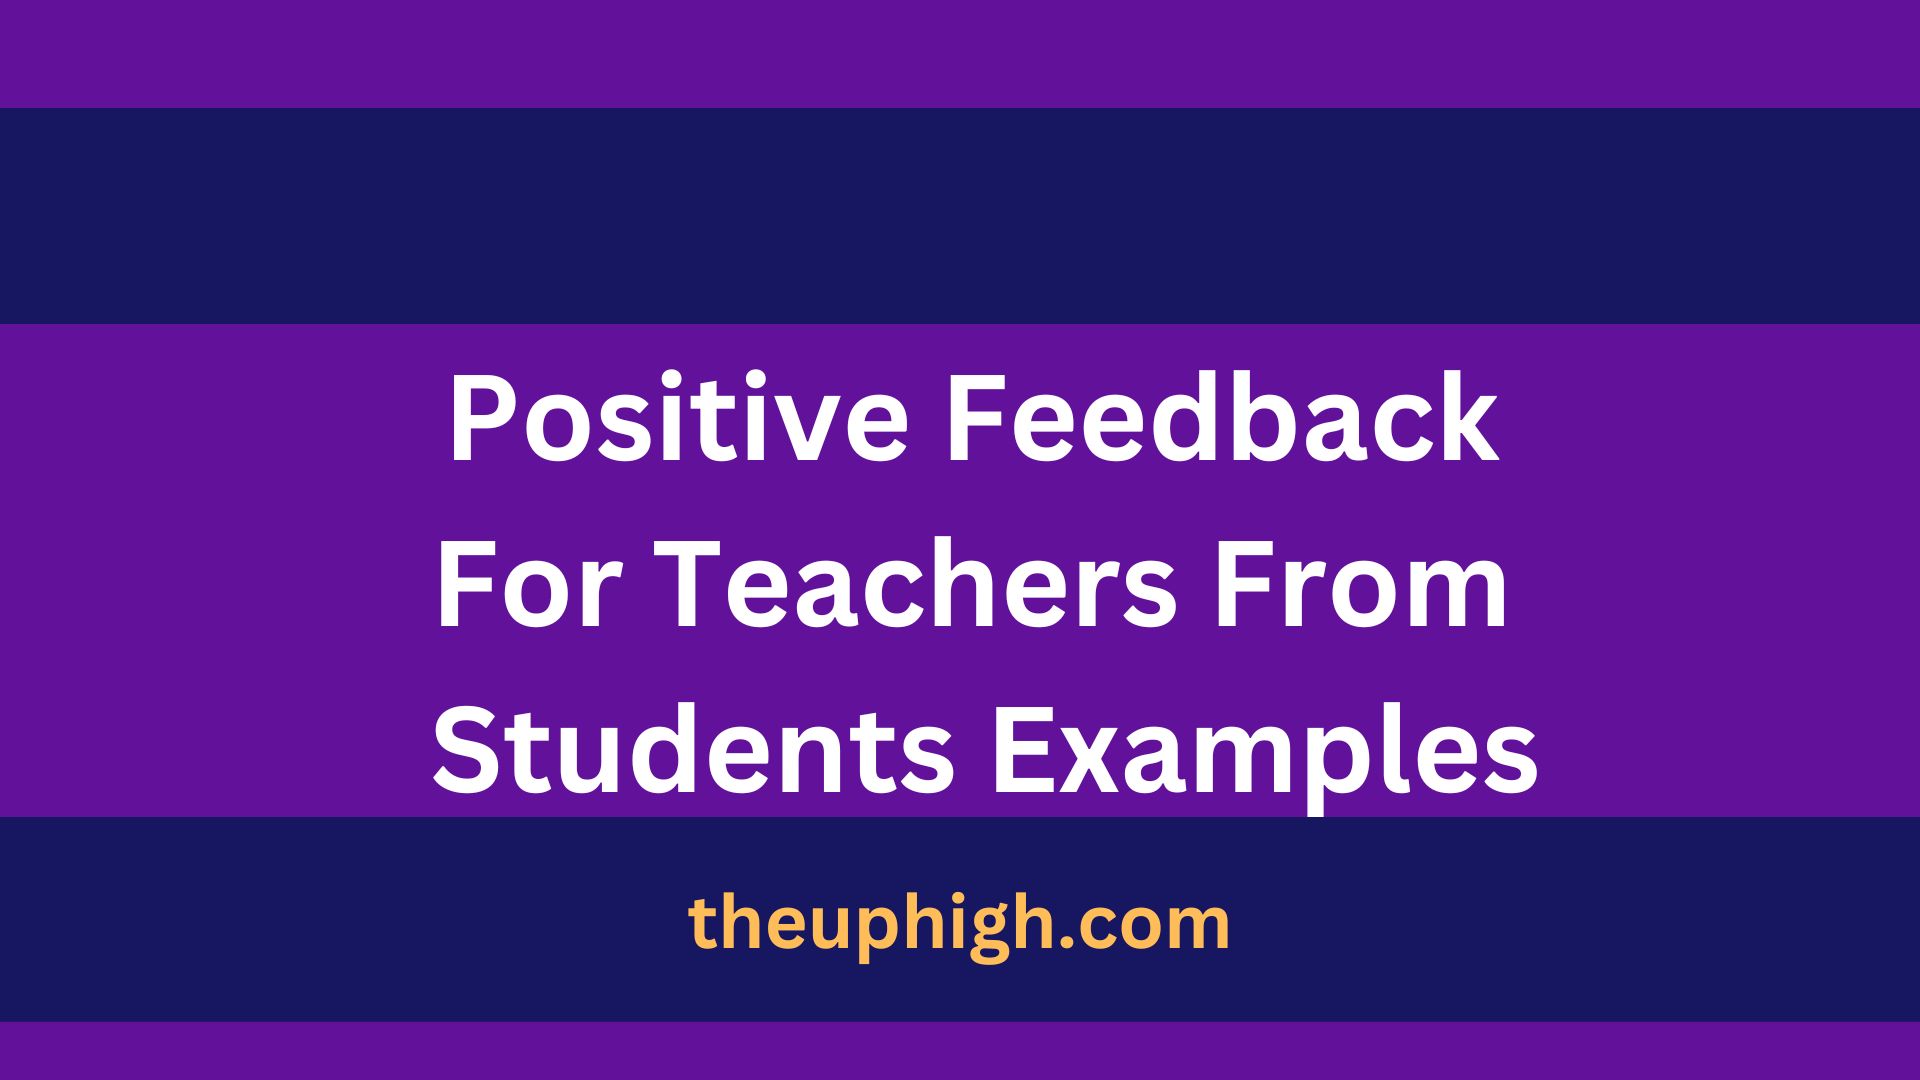 Positive Feedback For Teachers From Students Examples